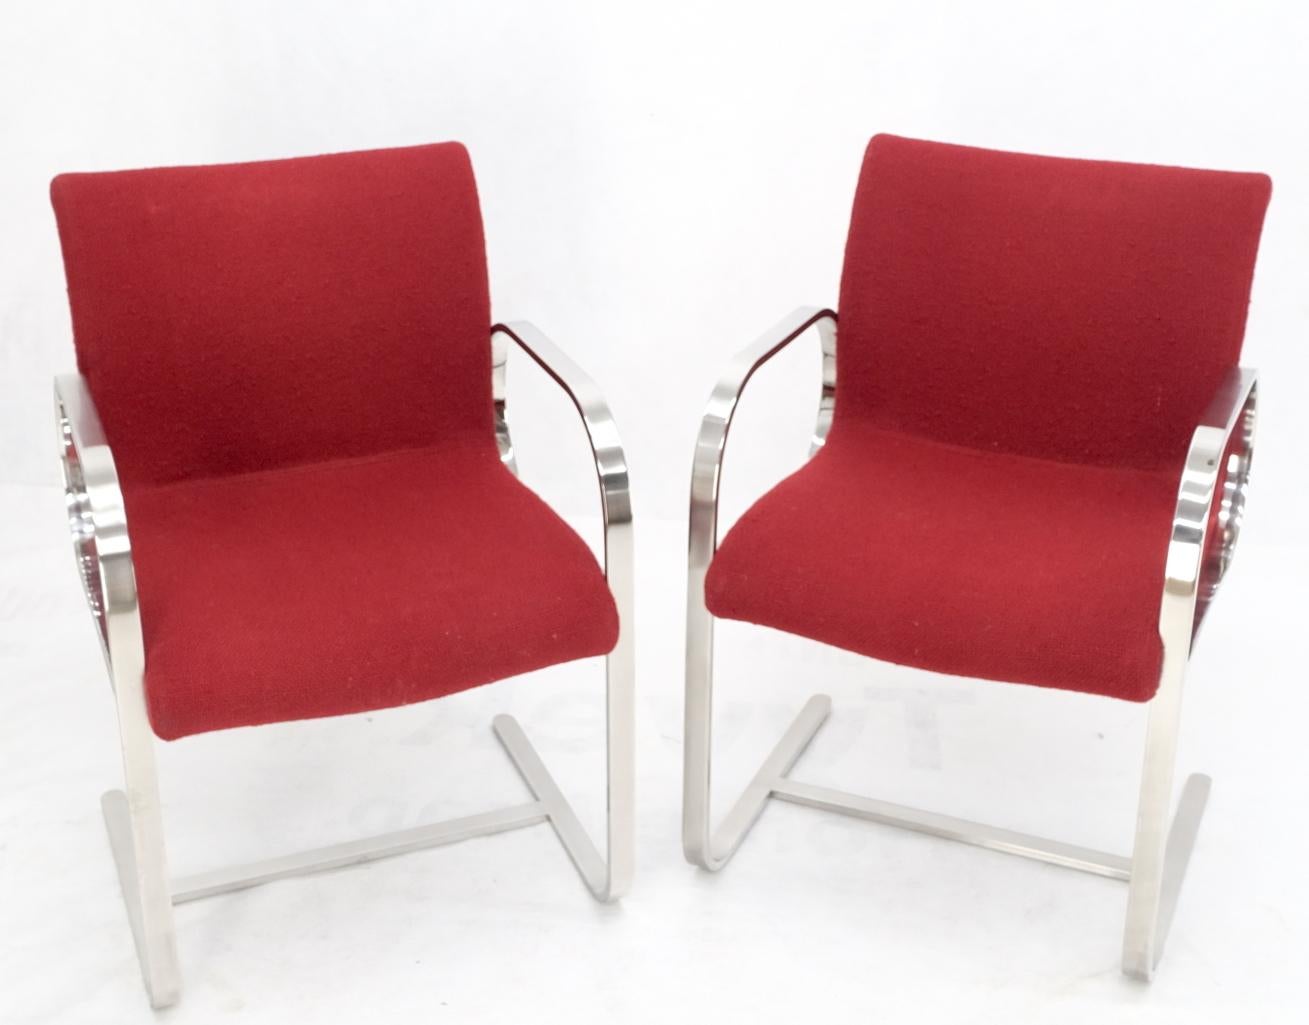 Pair heavy solid stainless steel formed bend frame side lounge chairs red upholstery.
Super high quality metal work bending welding and polishing of stainless steel. Bauhaus Le Corbusier, Mies Van Der Rohe decor match.